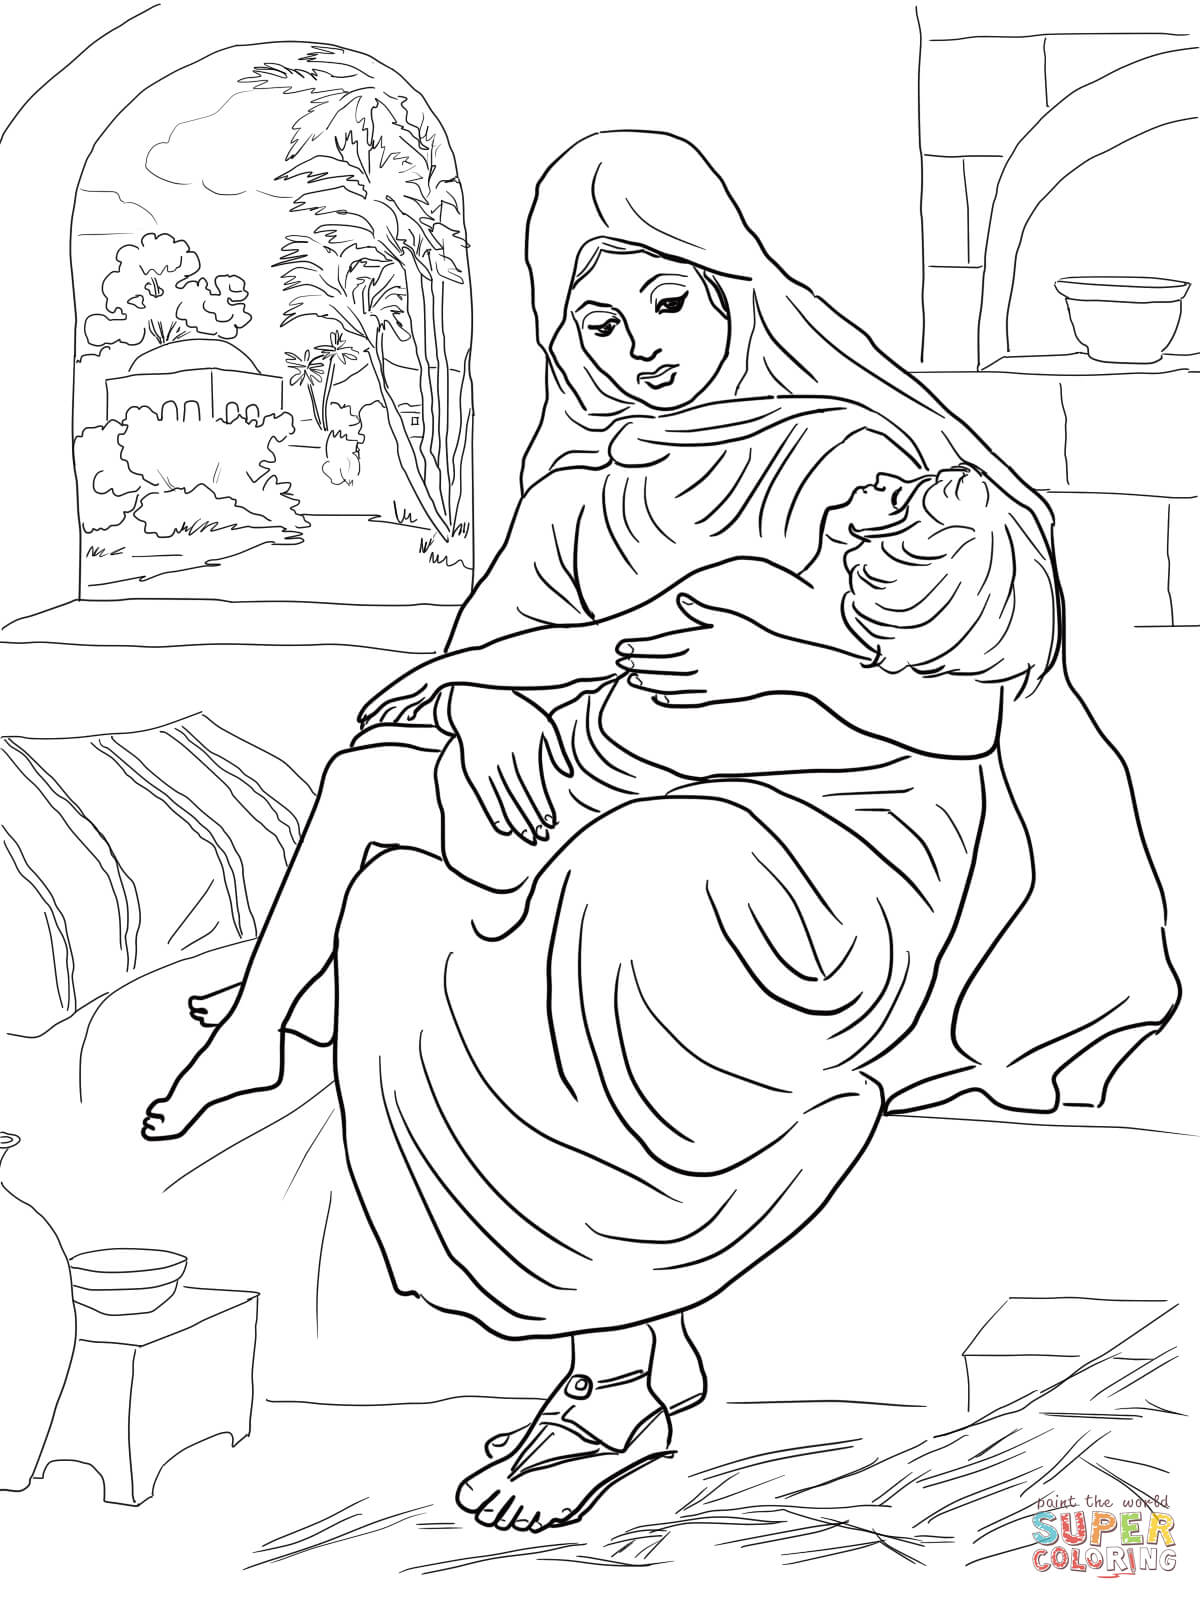 Shunammite woman and her son coloring page free printable coloring pages